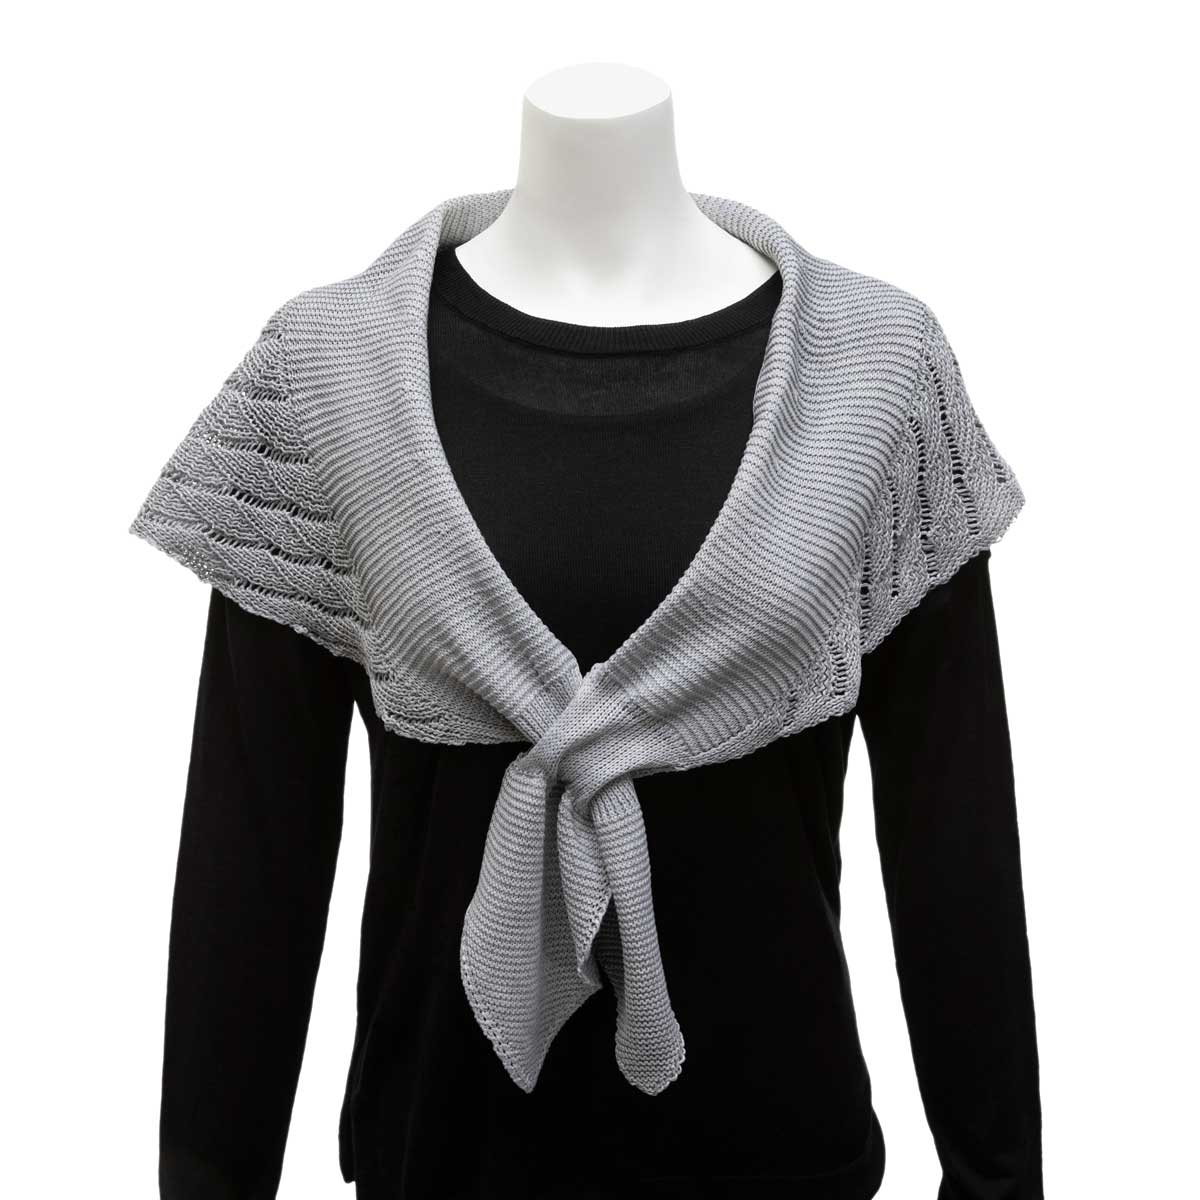 GREY WRAP WITH PULL THROUGH CLOSURE 15"X23" (ONE SIZE FITS MOST)